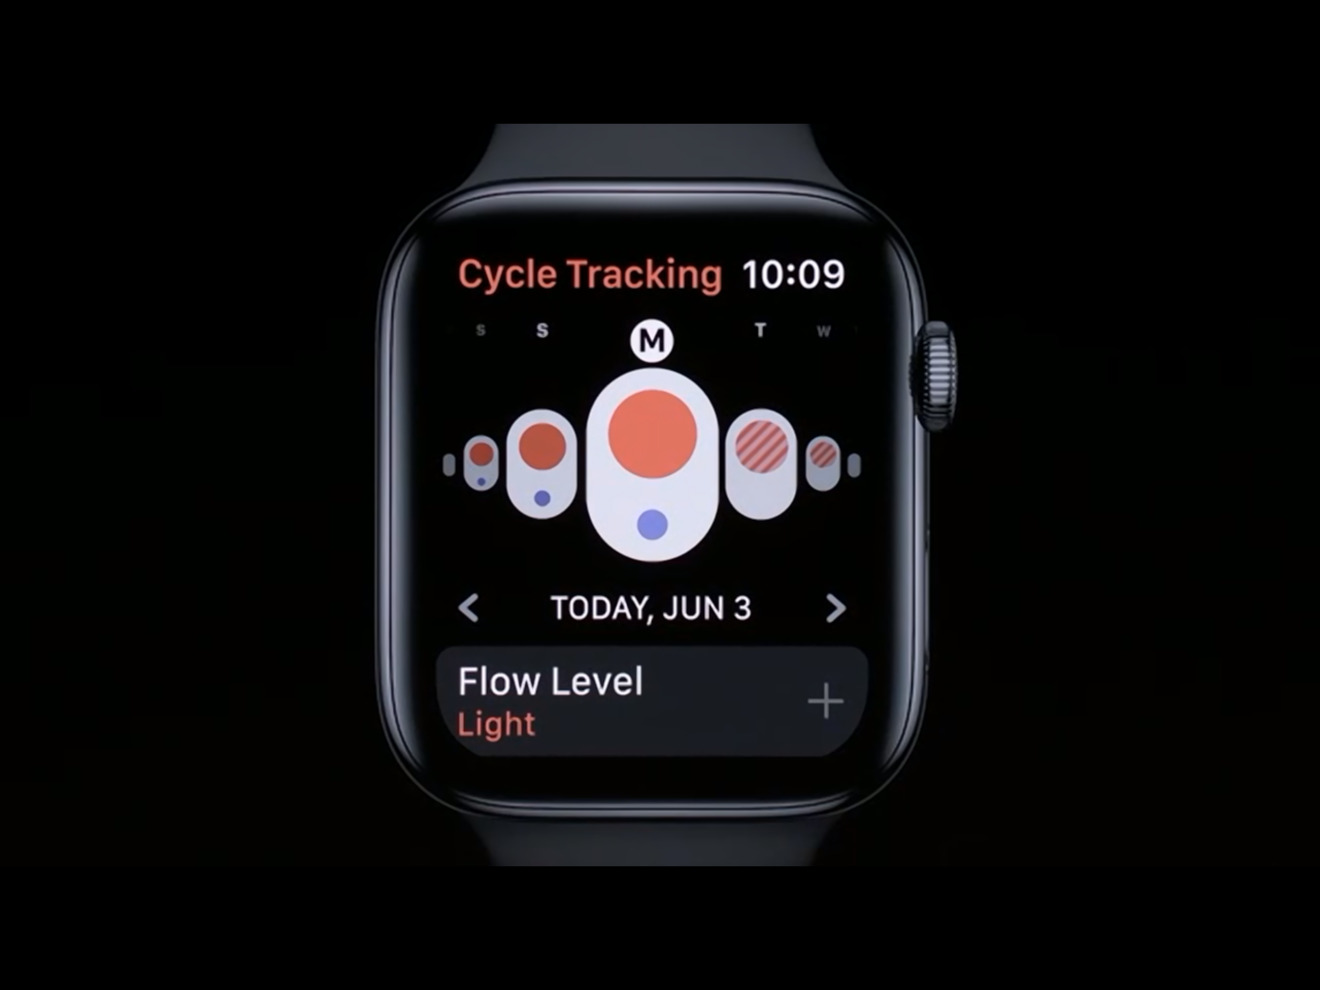 Menstrual cycle tracking is the biggest new health feature in Apple Watch by far